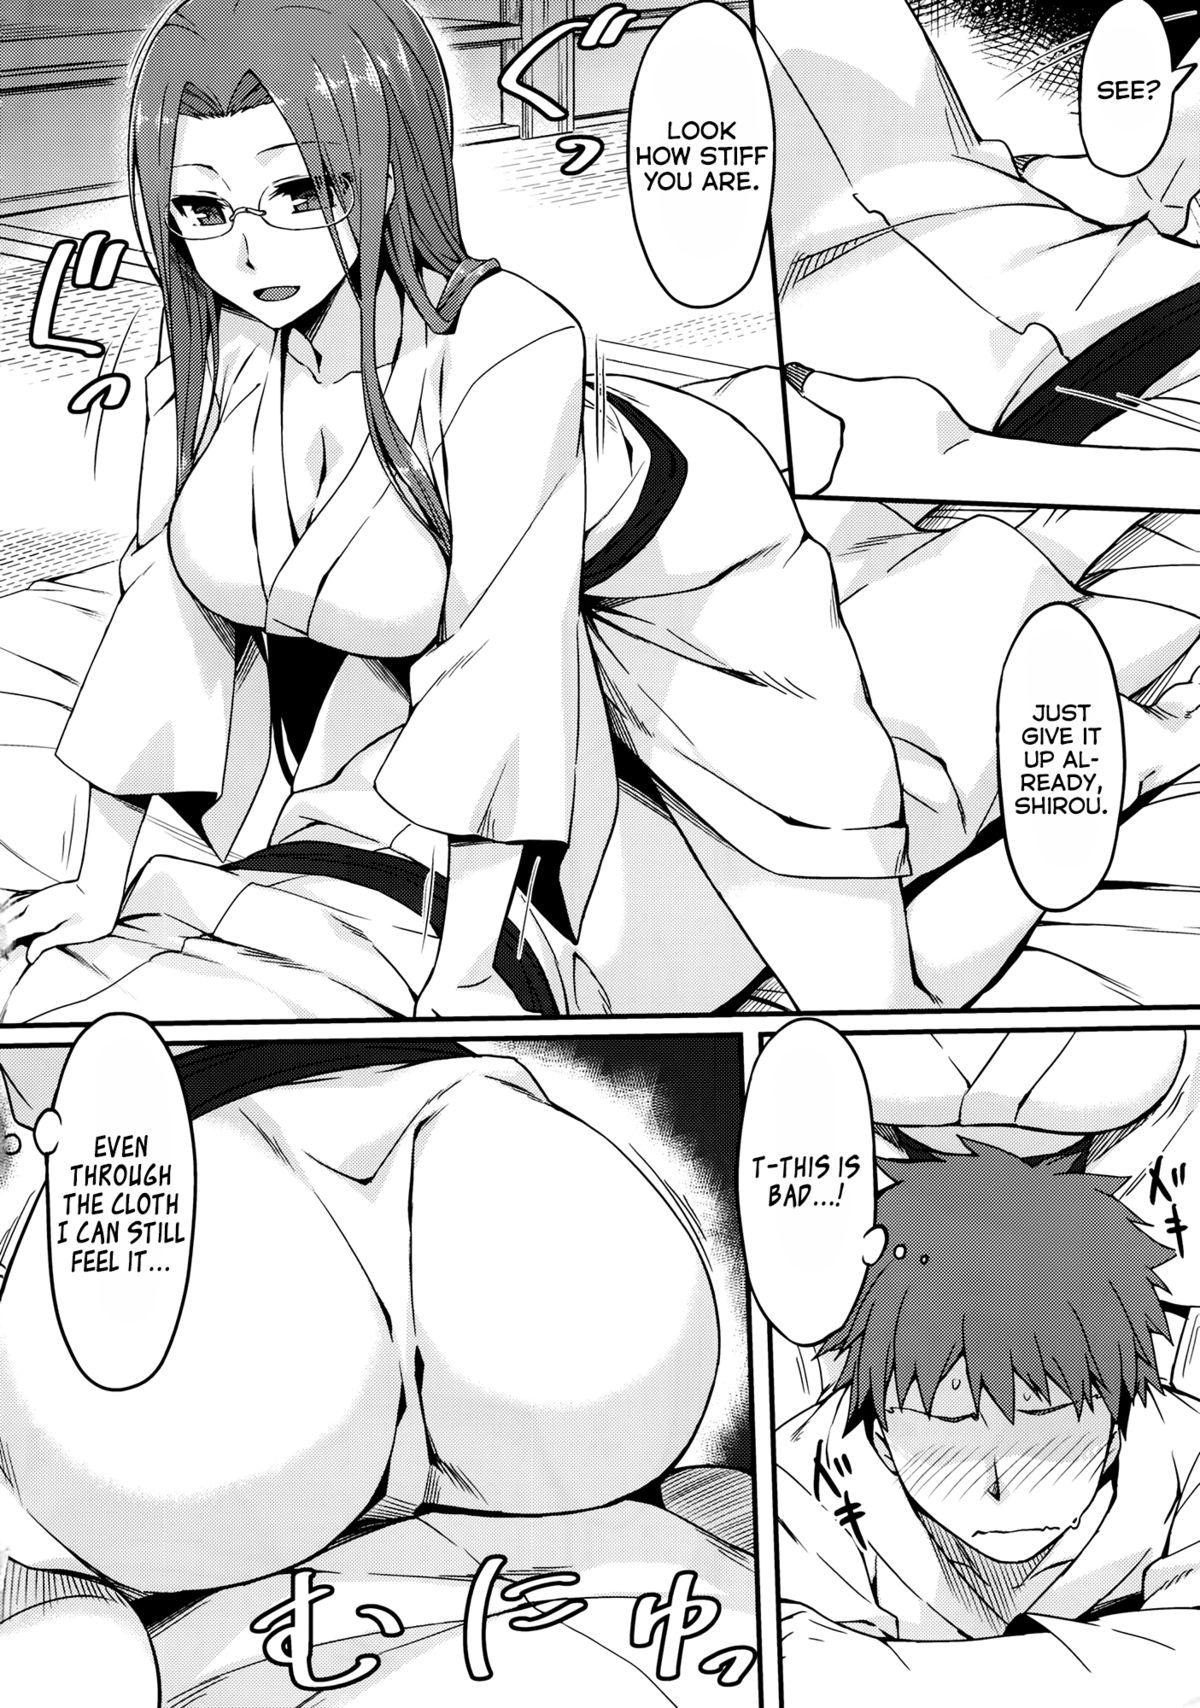 Pack (C88) [S.S.L (Yanagi)] Rider-san to Onsen Yado. Sonogo | Hot Spring Inn With Rider-san. After Story (Fate/stay night) [English] [Facedesk] - Fate stay night Porno - Page 4